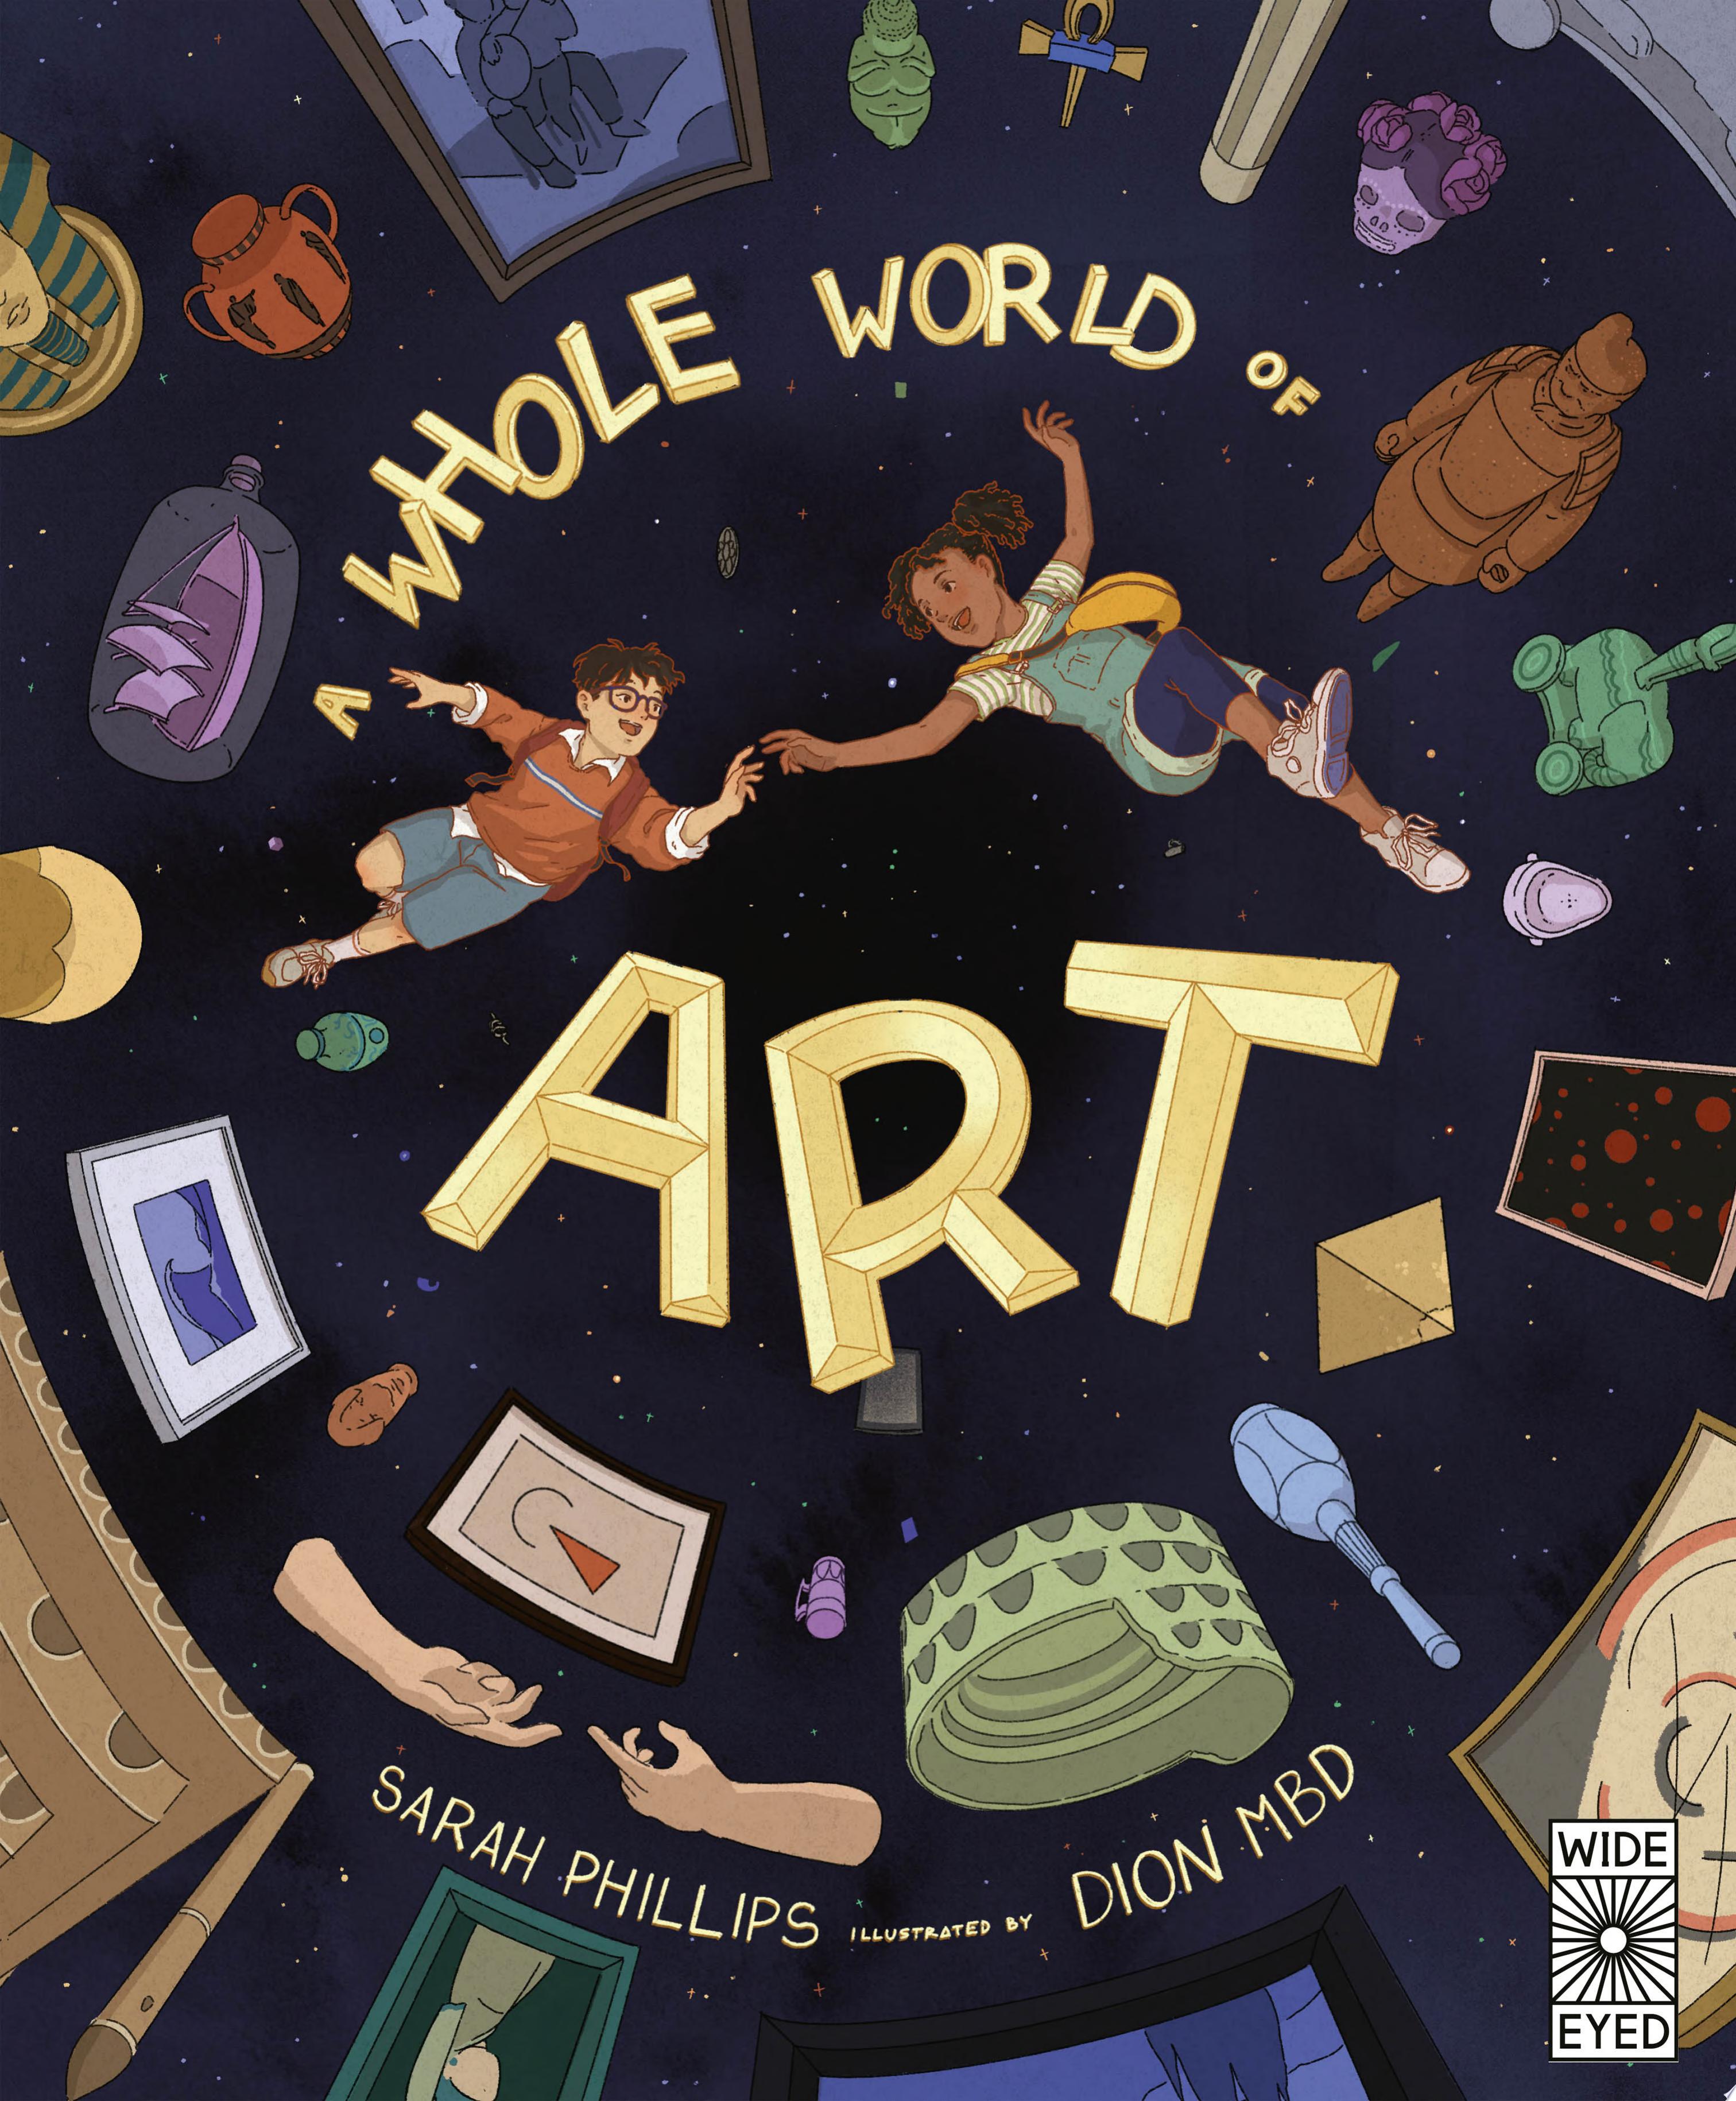 Image for "A Whole World of Art"